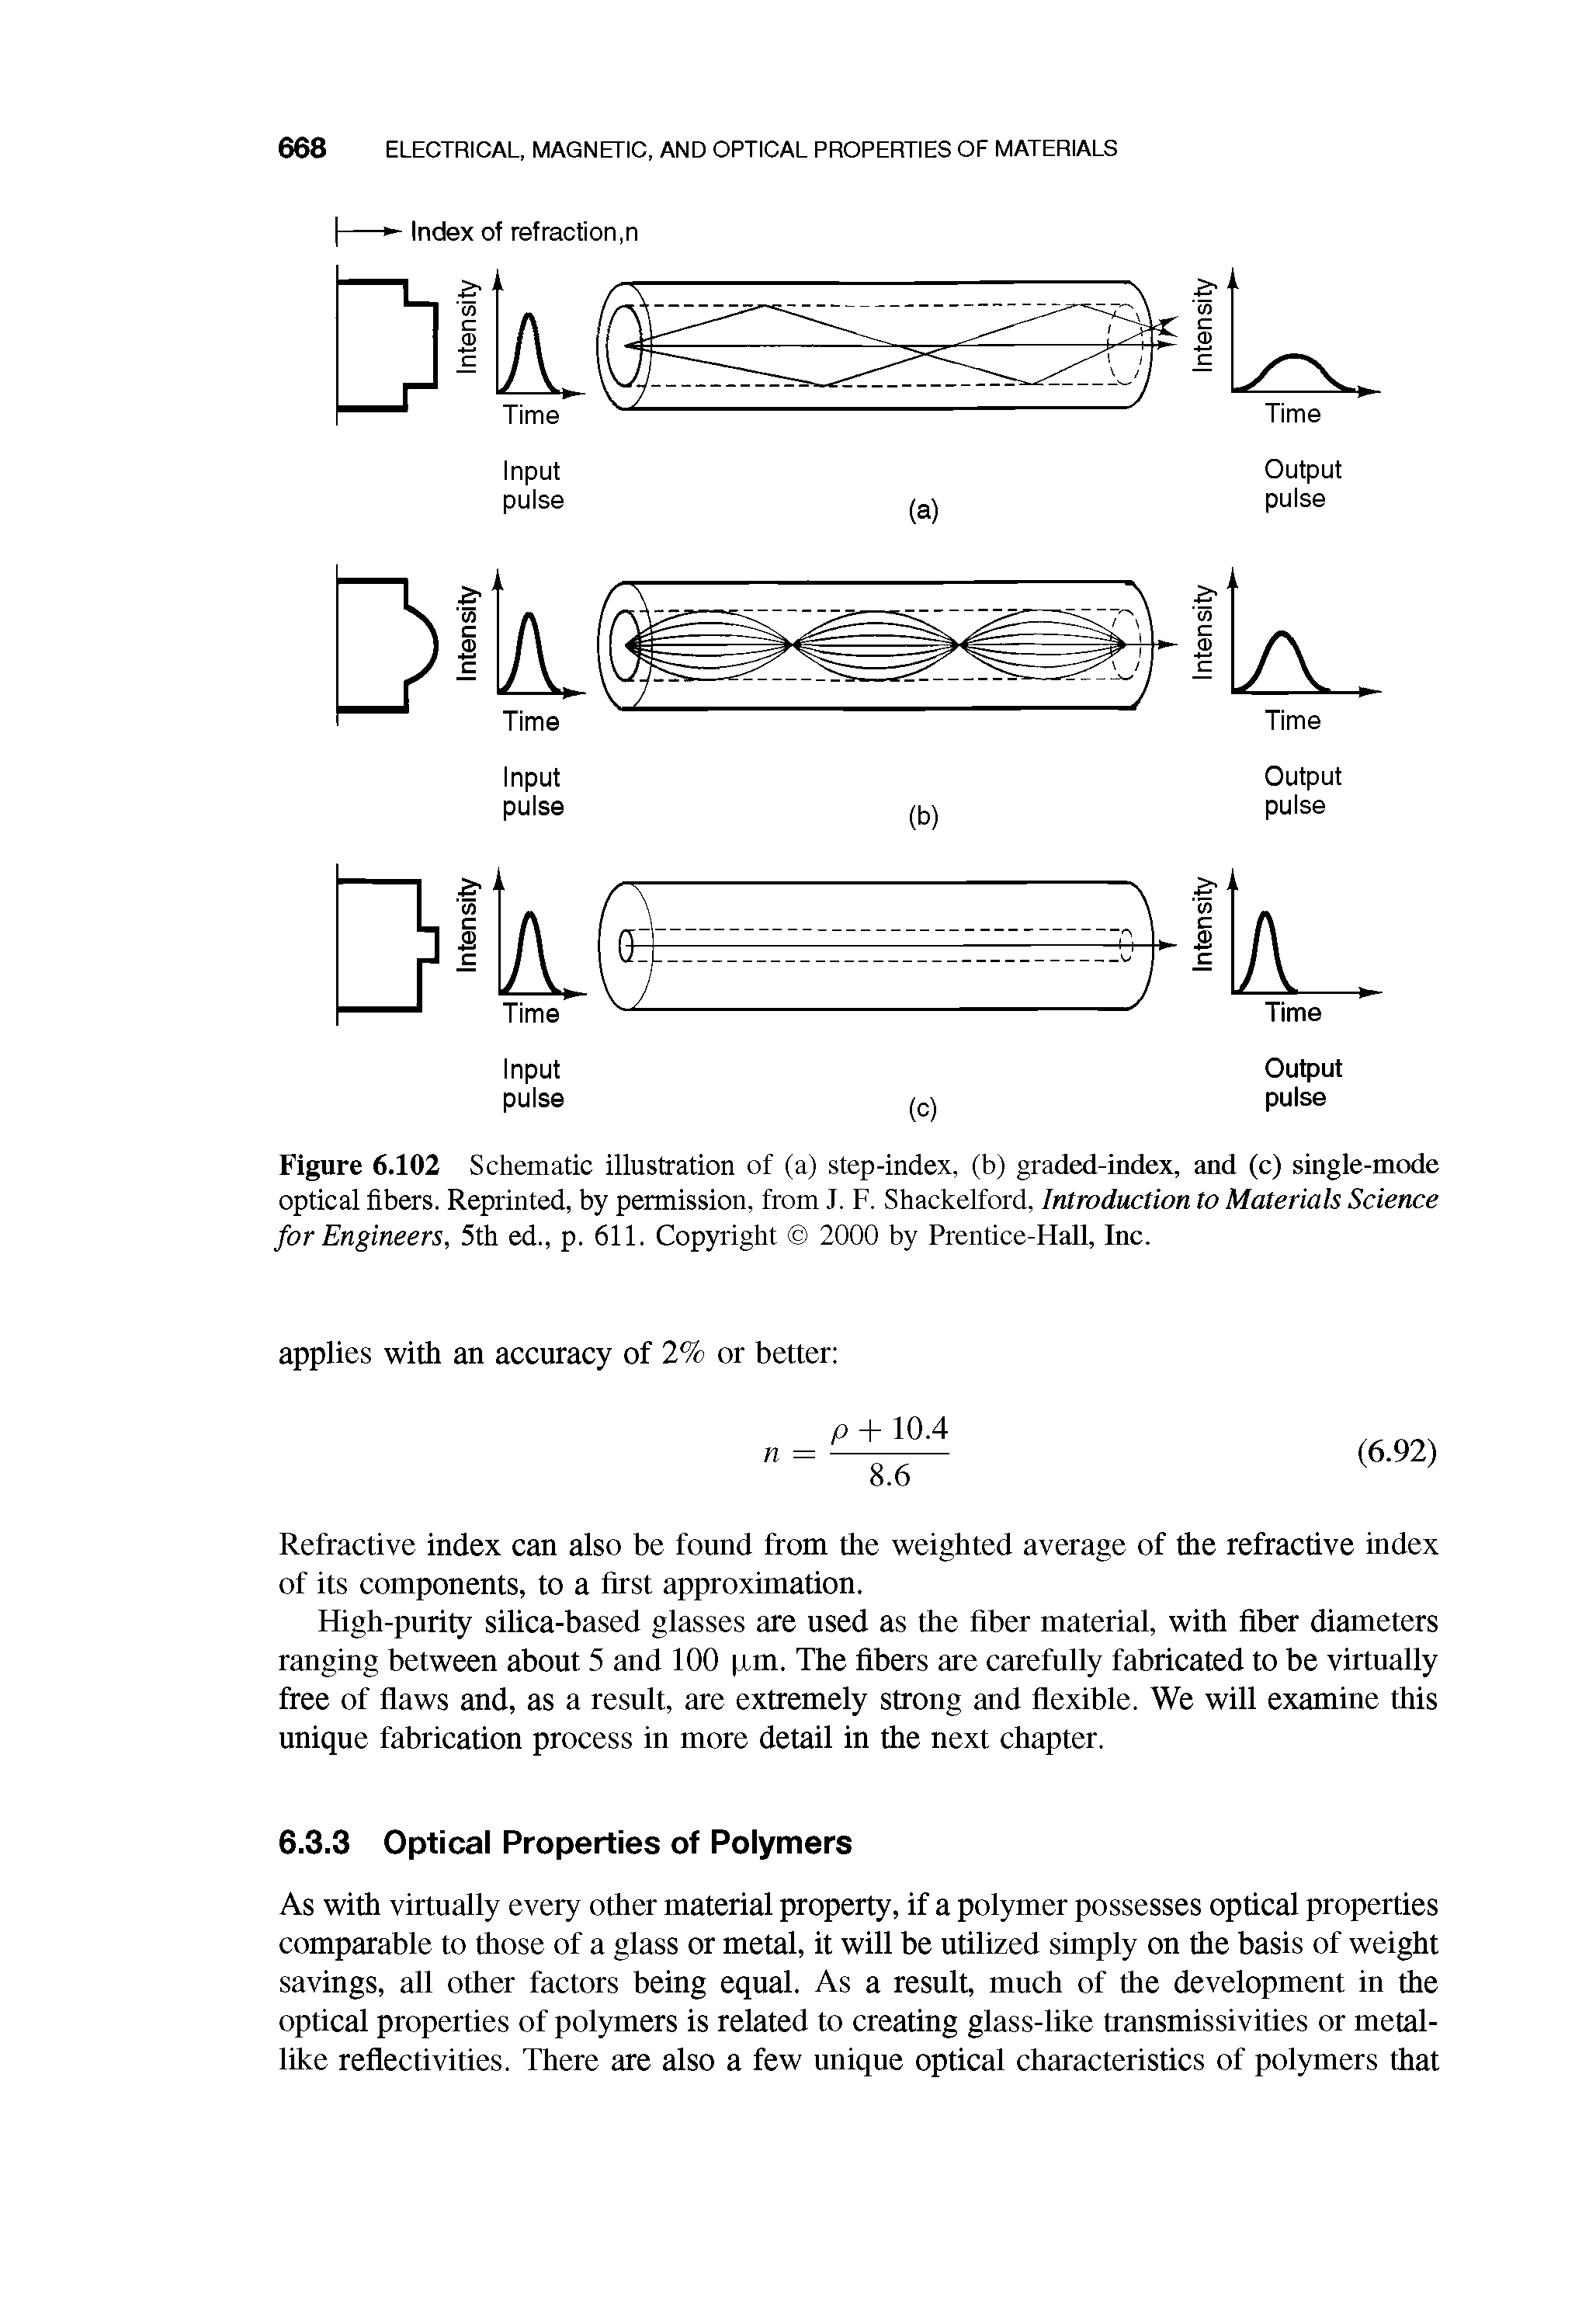 Figure 6.102 Schematic illustration of (a) step-index, (b) graded-index, and (c) single-mode optical fibers. Reprinted, by permission, from J. F. Shackelford, Introduction to Materials Science for Engineers, 5th ed., p. 611. Copyright 2000 by Prentice-Hall, Inc.